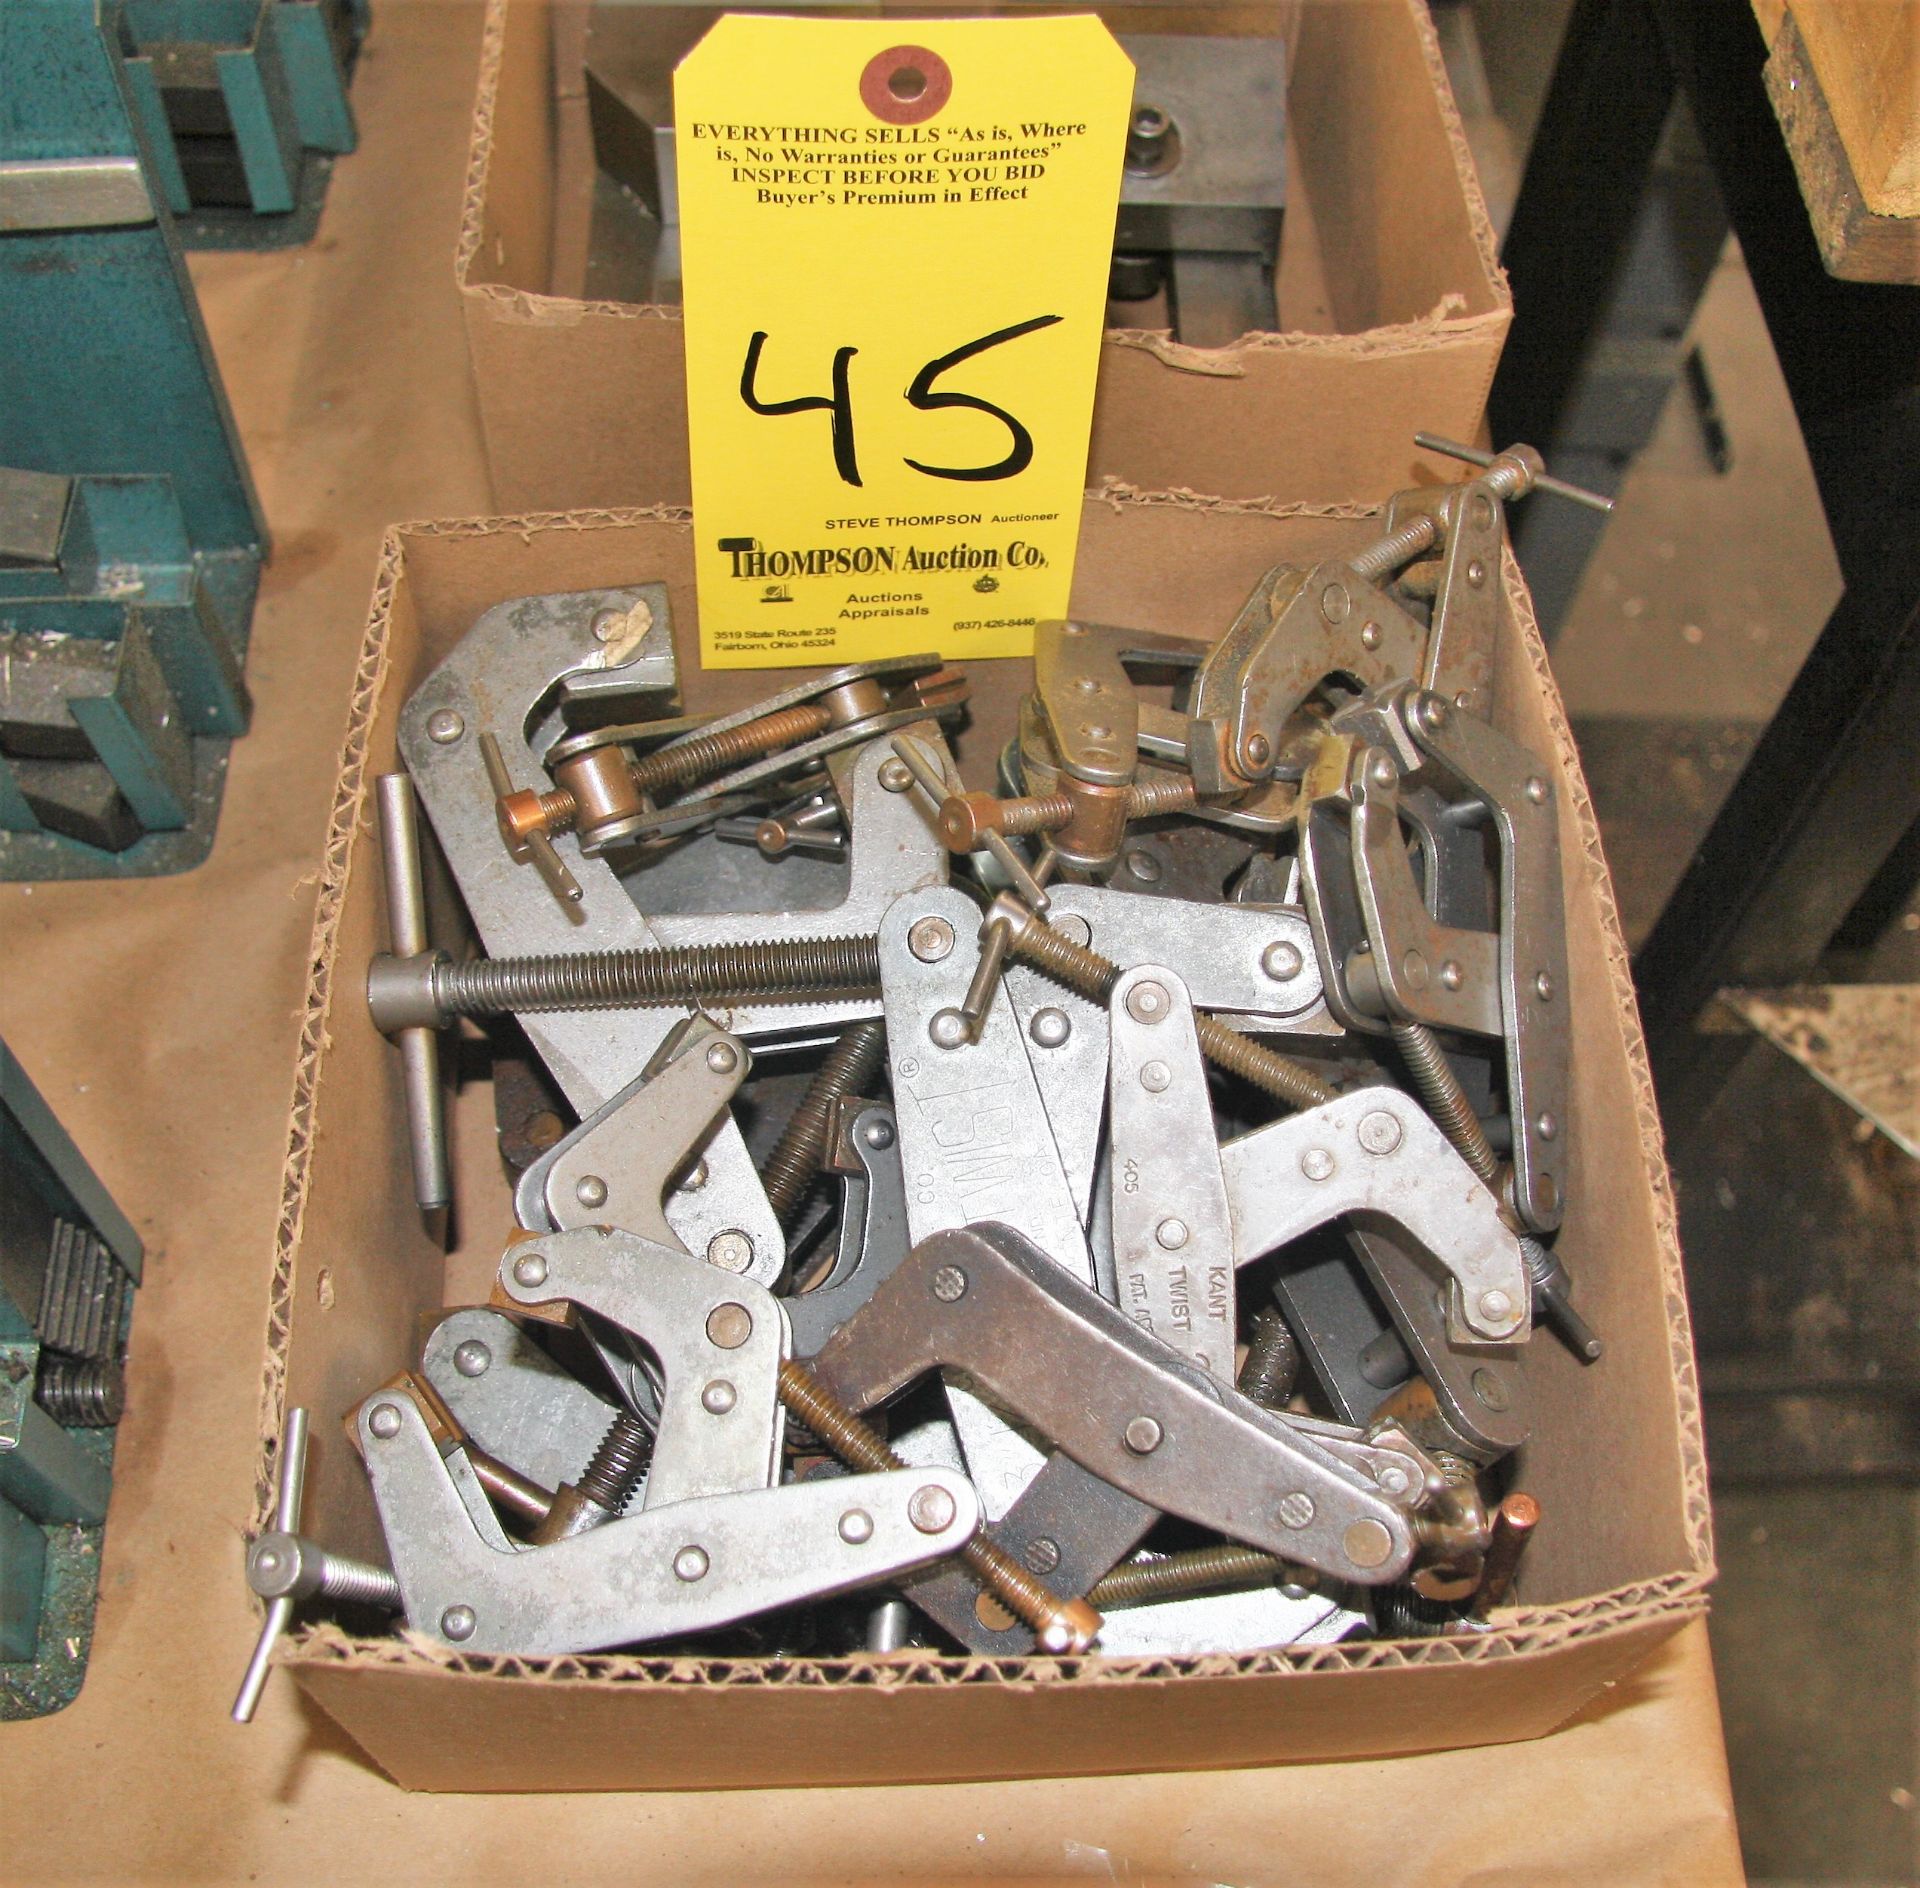 Lot, Kant Twist Clamps